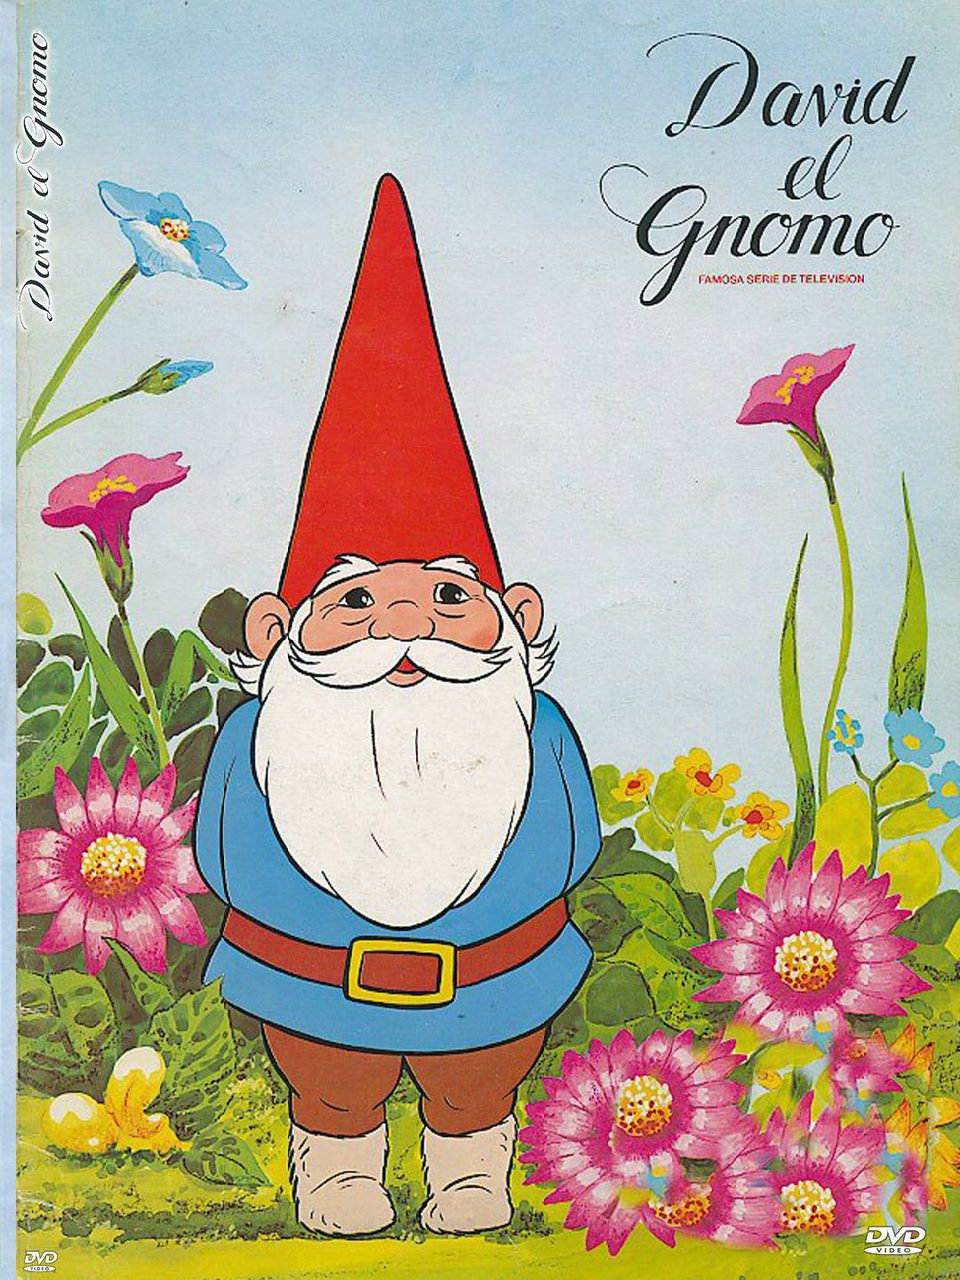 Poster of David the Gnome - Cartel